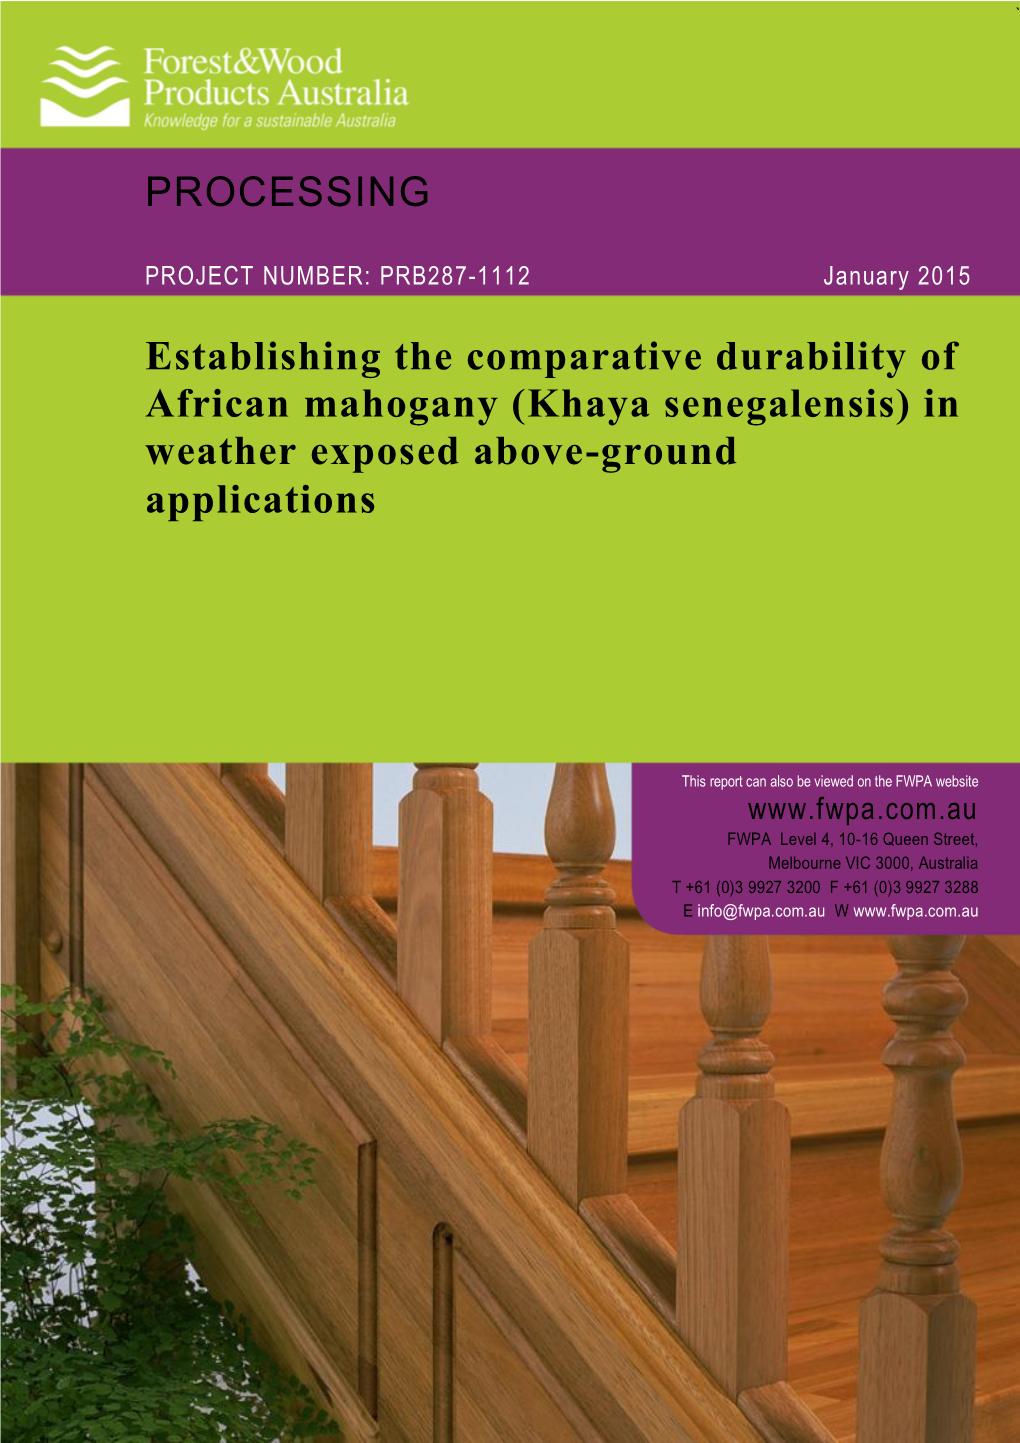 Establishing the Comparative Durability of African Mahogany (Khaya Senegalensis) in Weather Exposed Above-Ground Applications